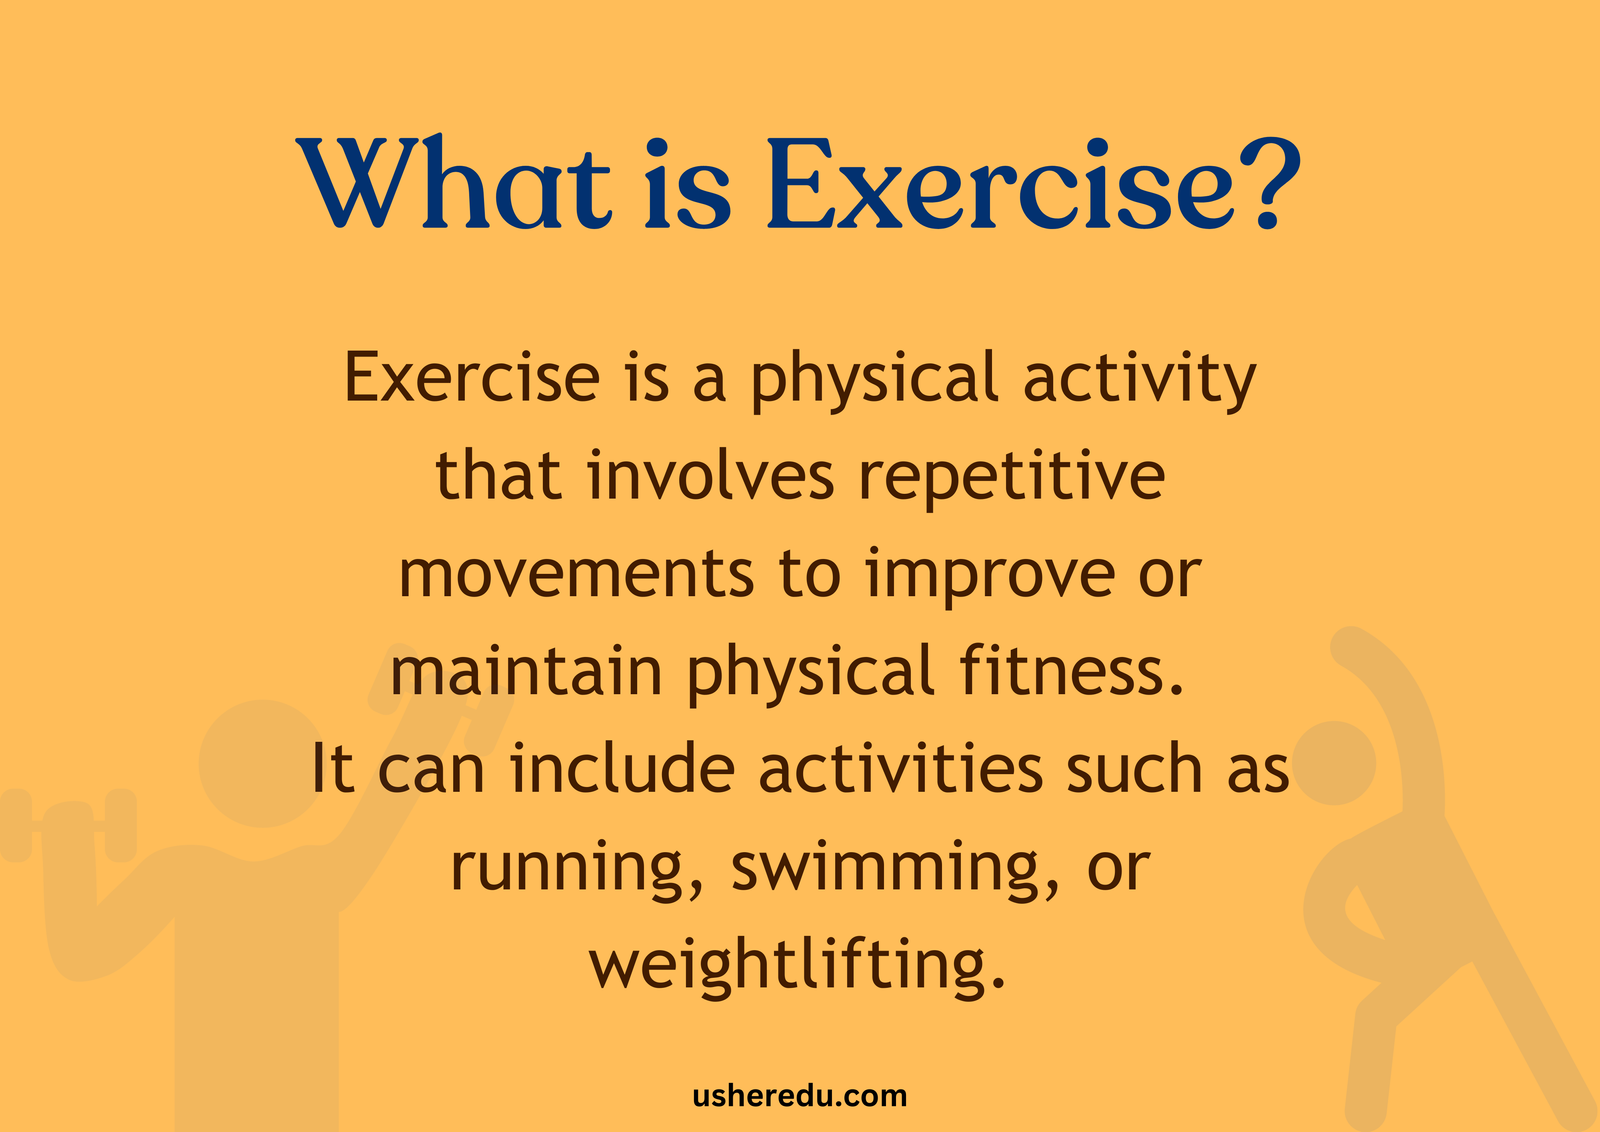 What is Exercise